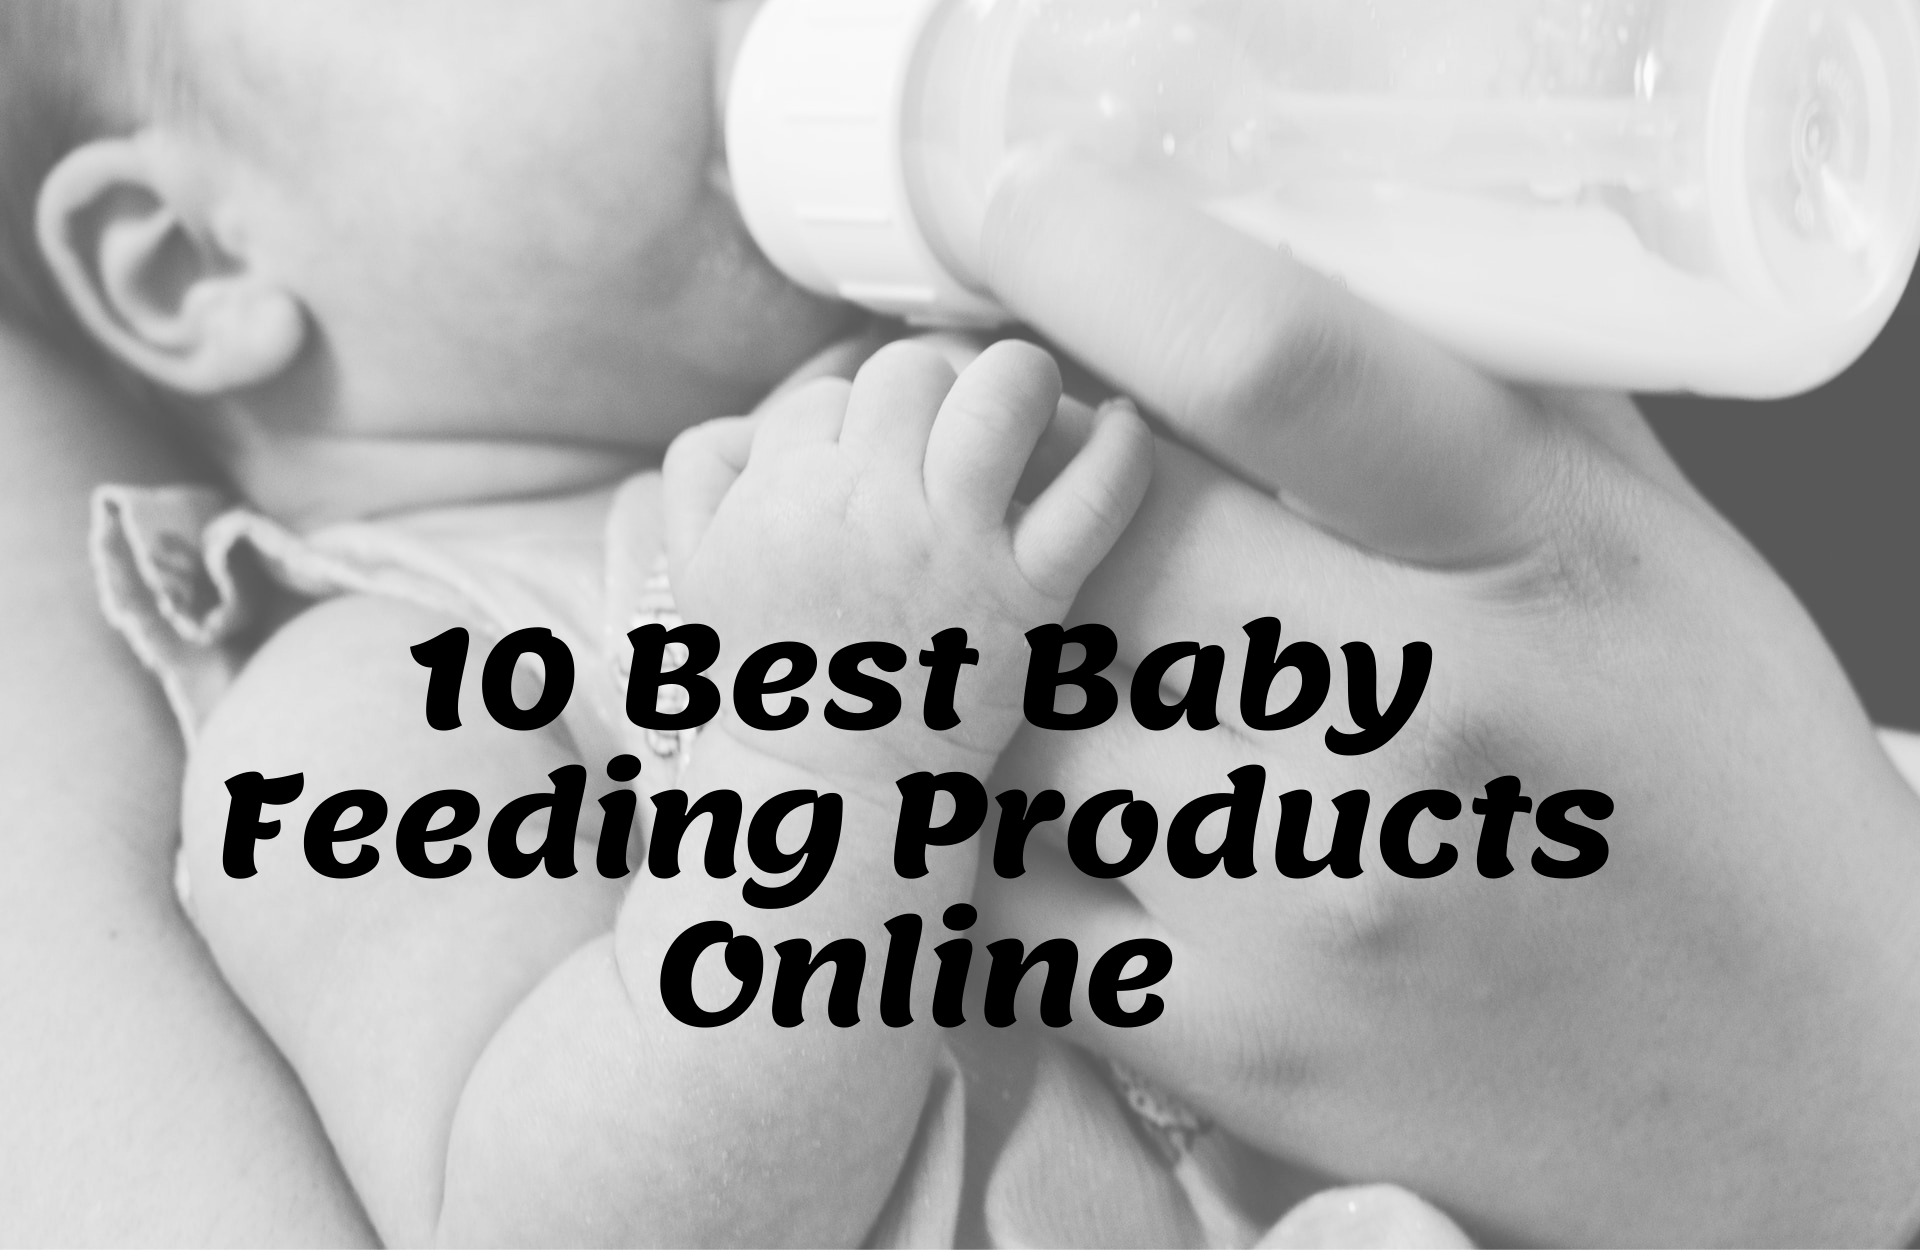 10 Best Baby Feeding Products Online (1)